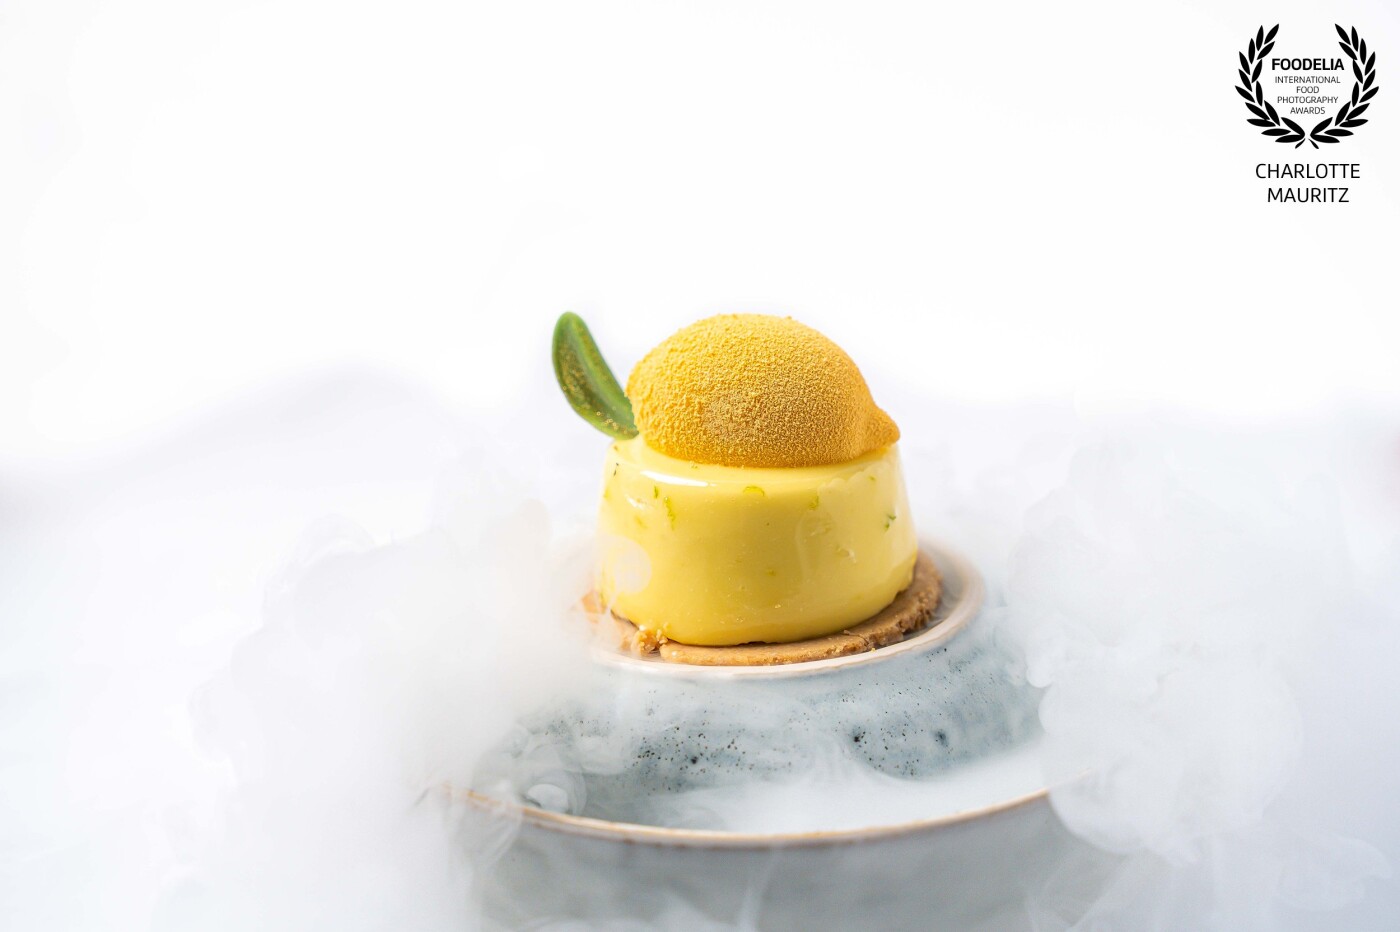 This Lemon pastry was the second subject when trying out the dry ice. The picture is giving me spring vibes but also a bit of magic because of the smoke.